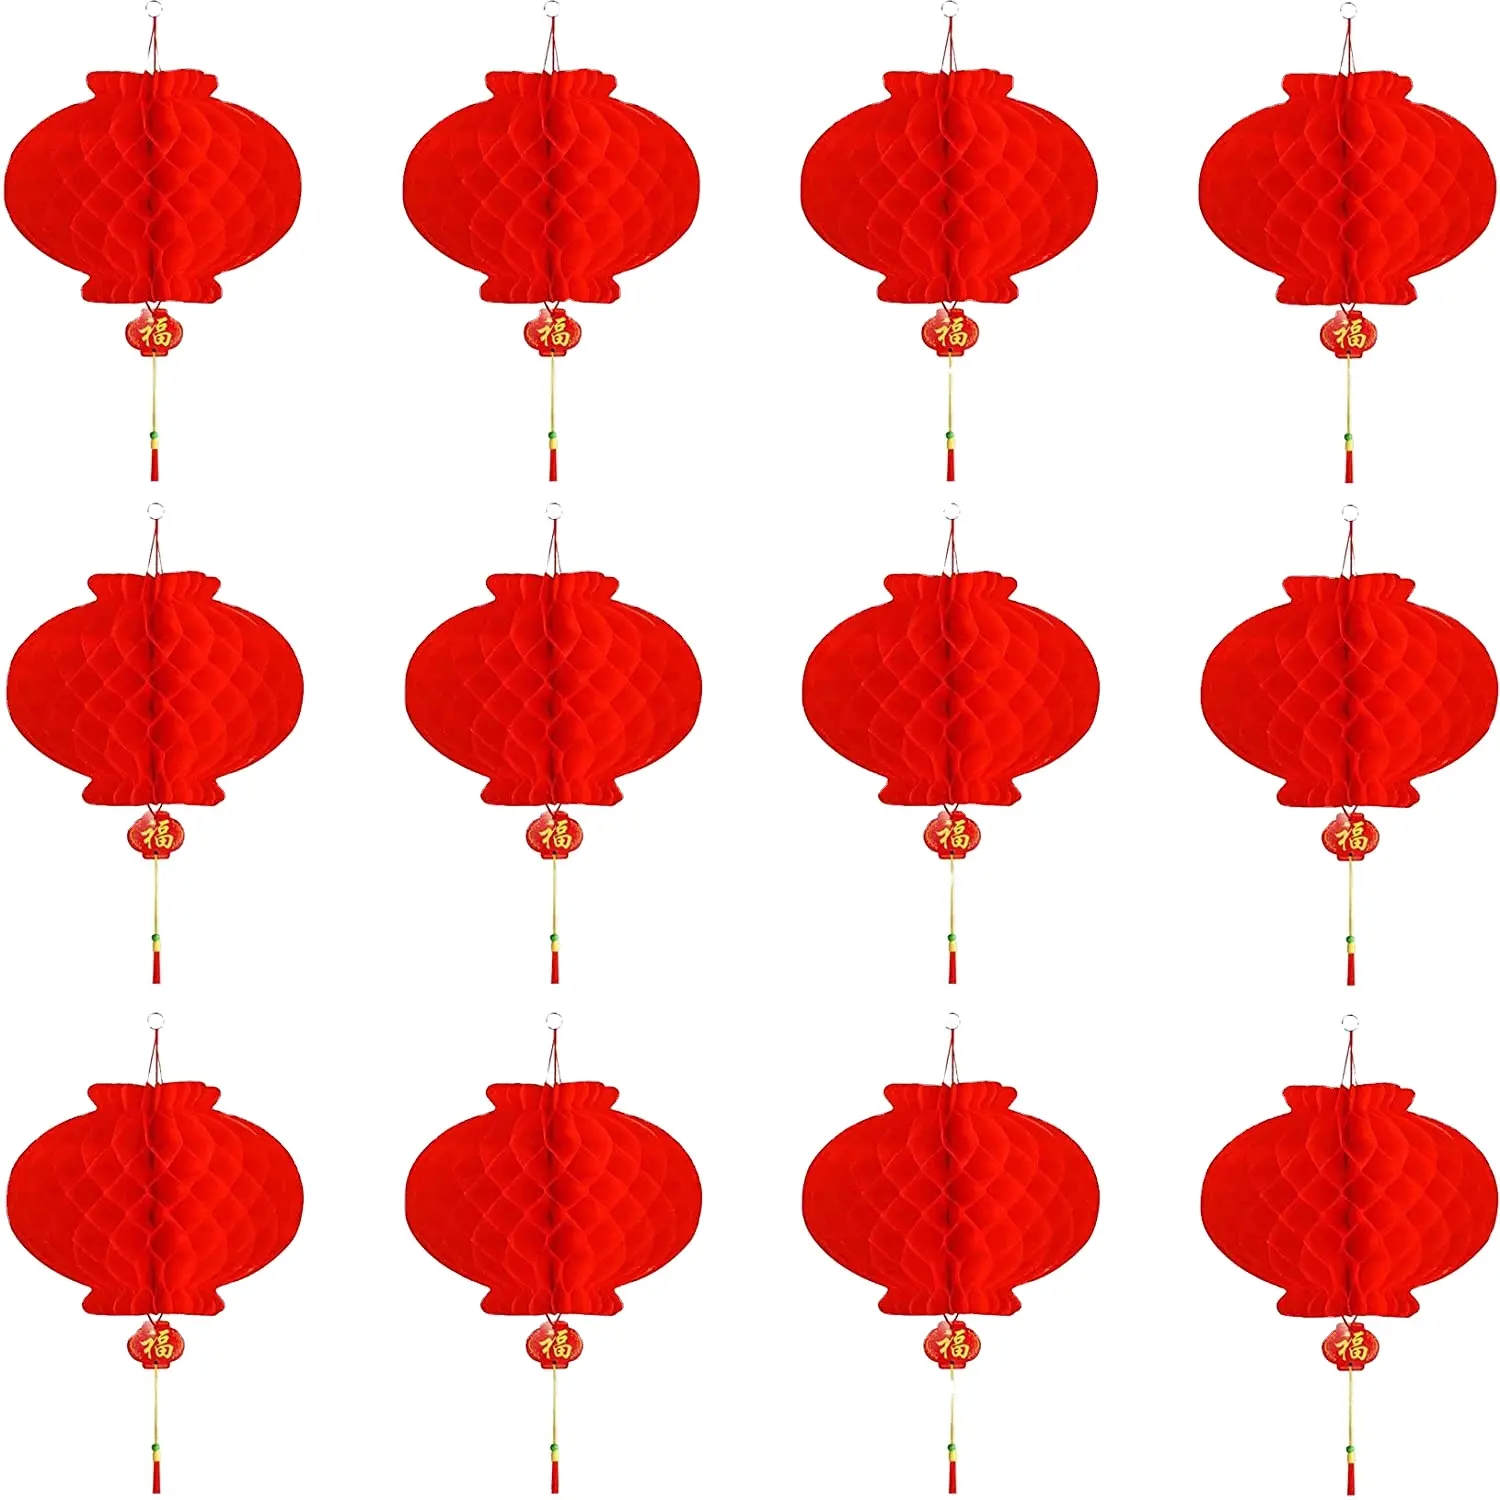 Red Paper Lanterns - 12 Pcs Hanging Chinese Lantern Chinese New Year Decoration for Spring Festival